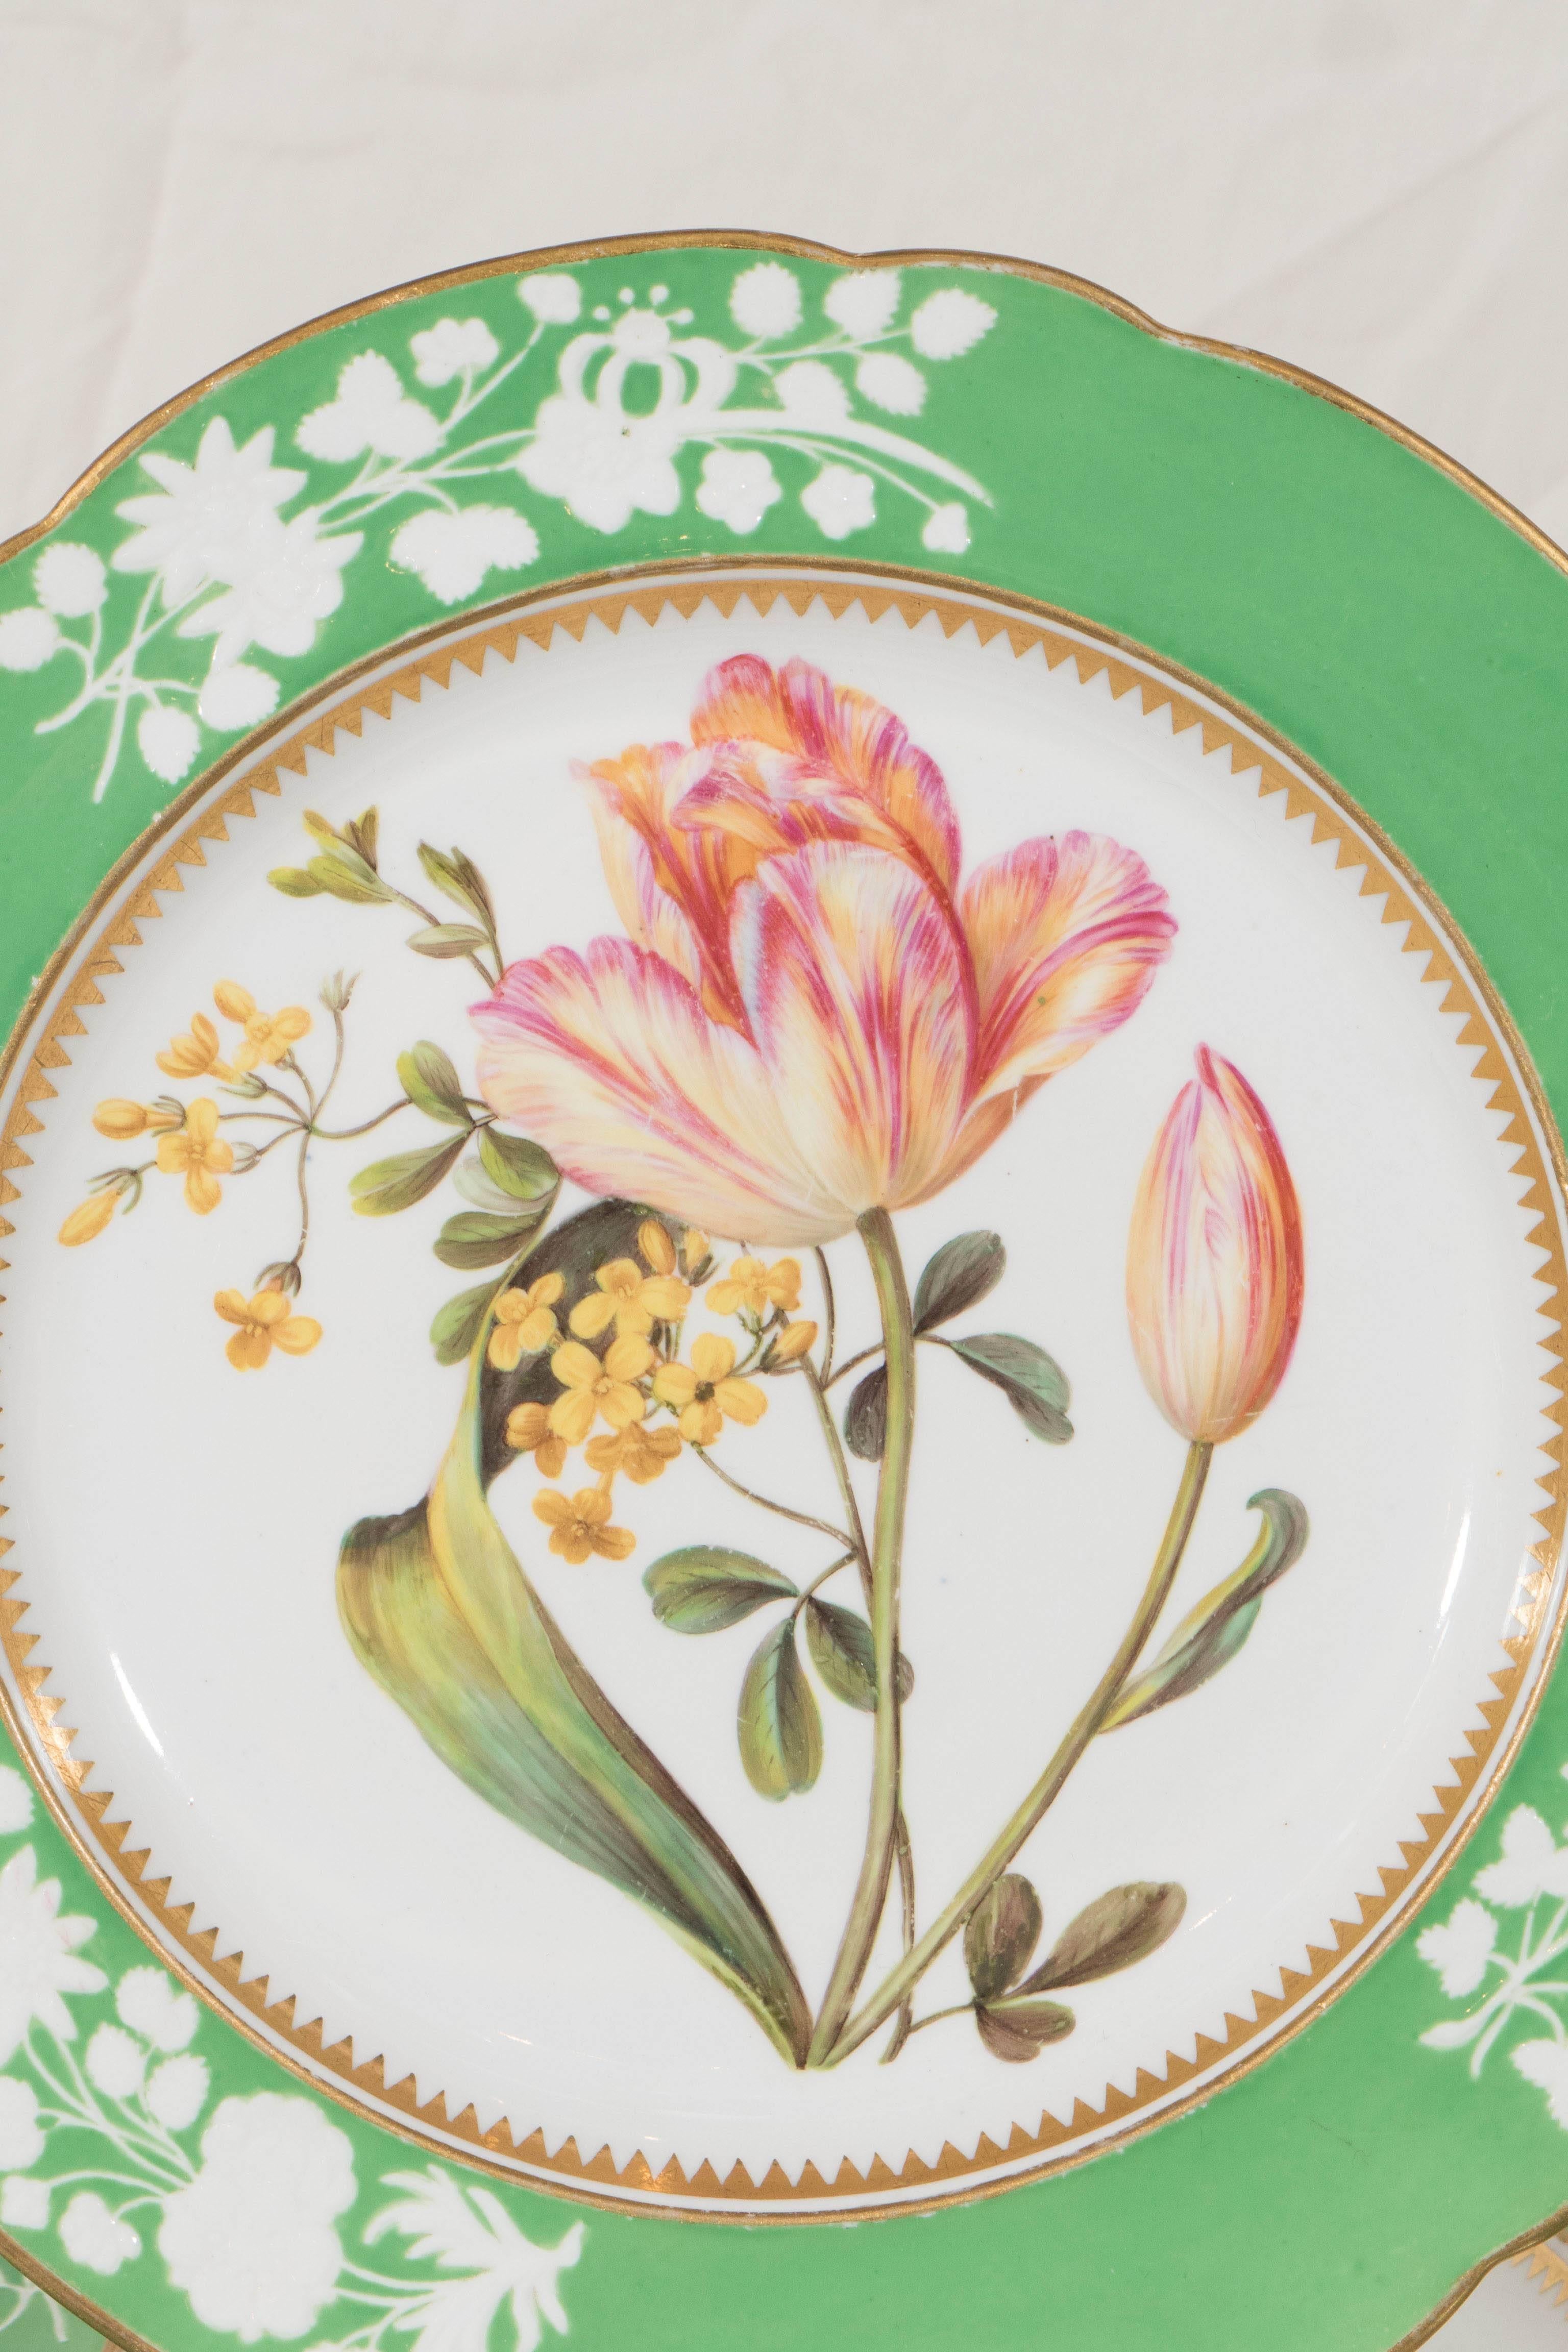 A set of twelve Spode botanical dishes each decorated with a single hand-painted flower. The individual specimens are among the most beautiful flowers we have ever seen painted on china. The borders are apple green with applied white leaves and